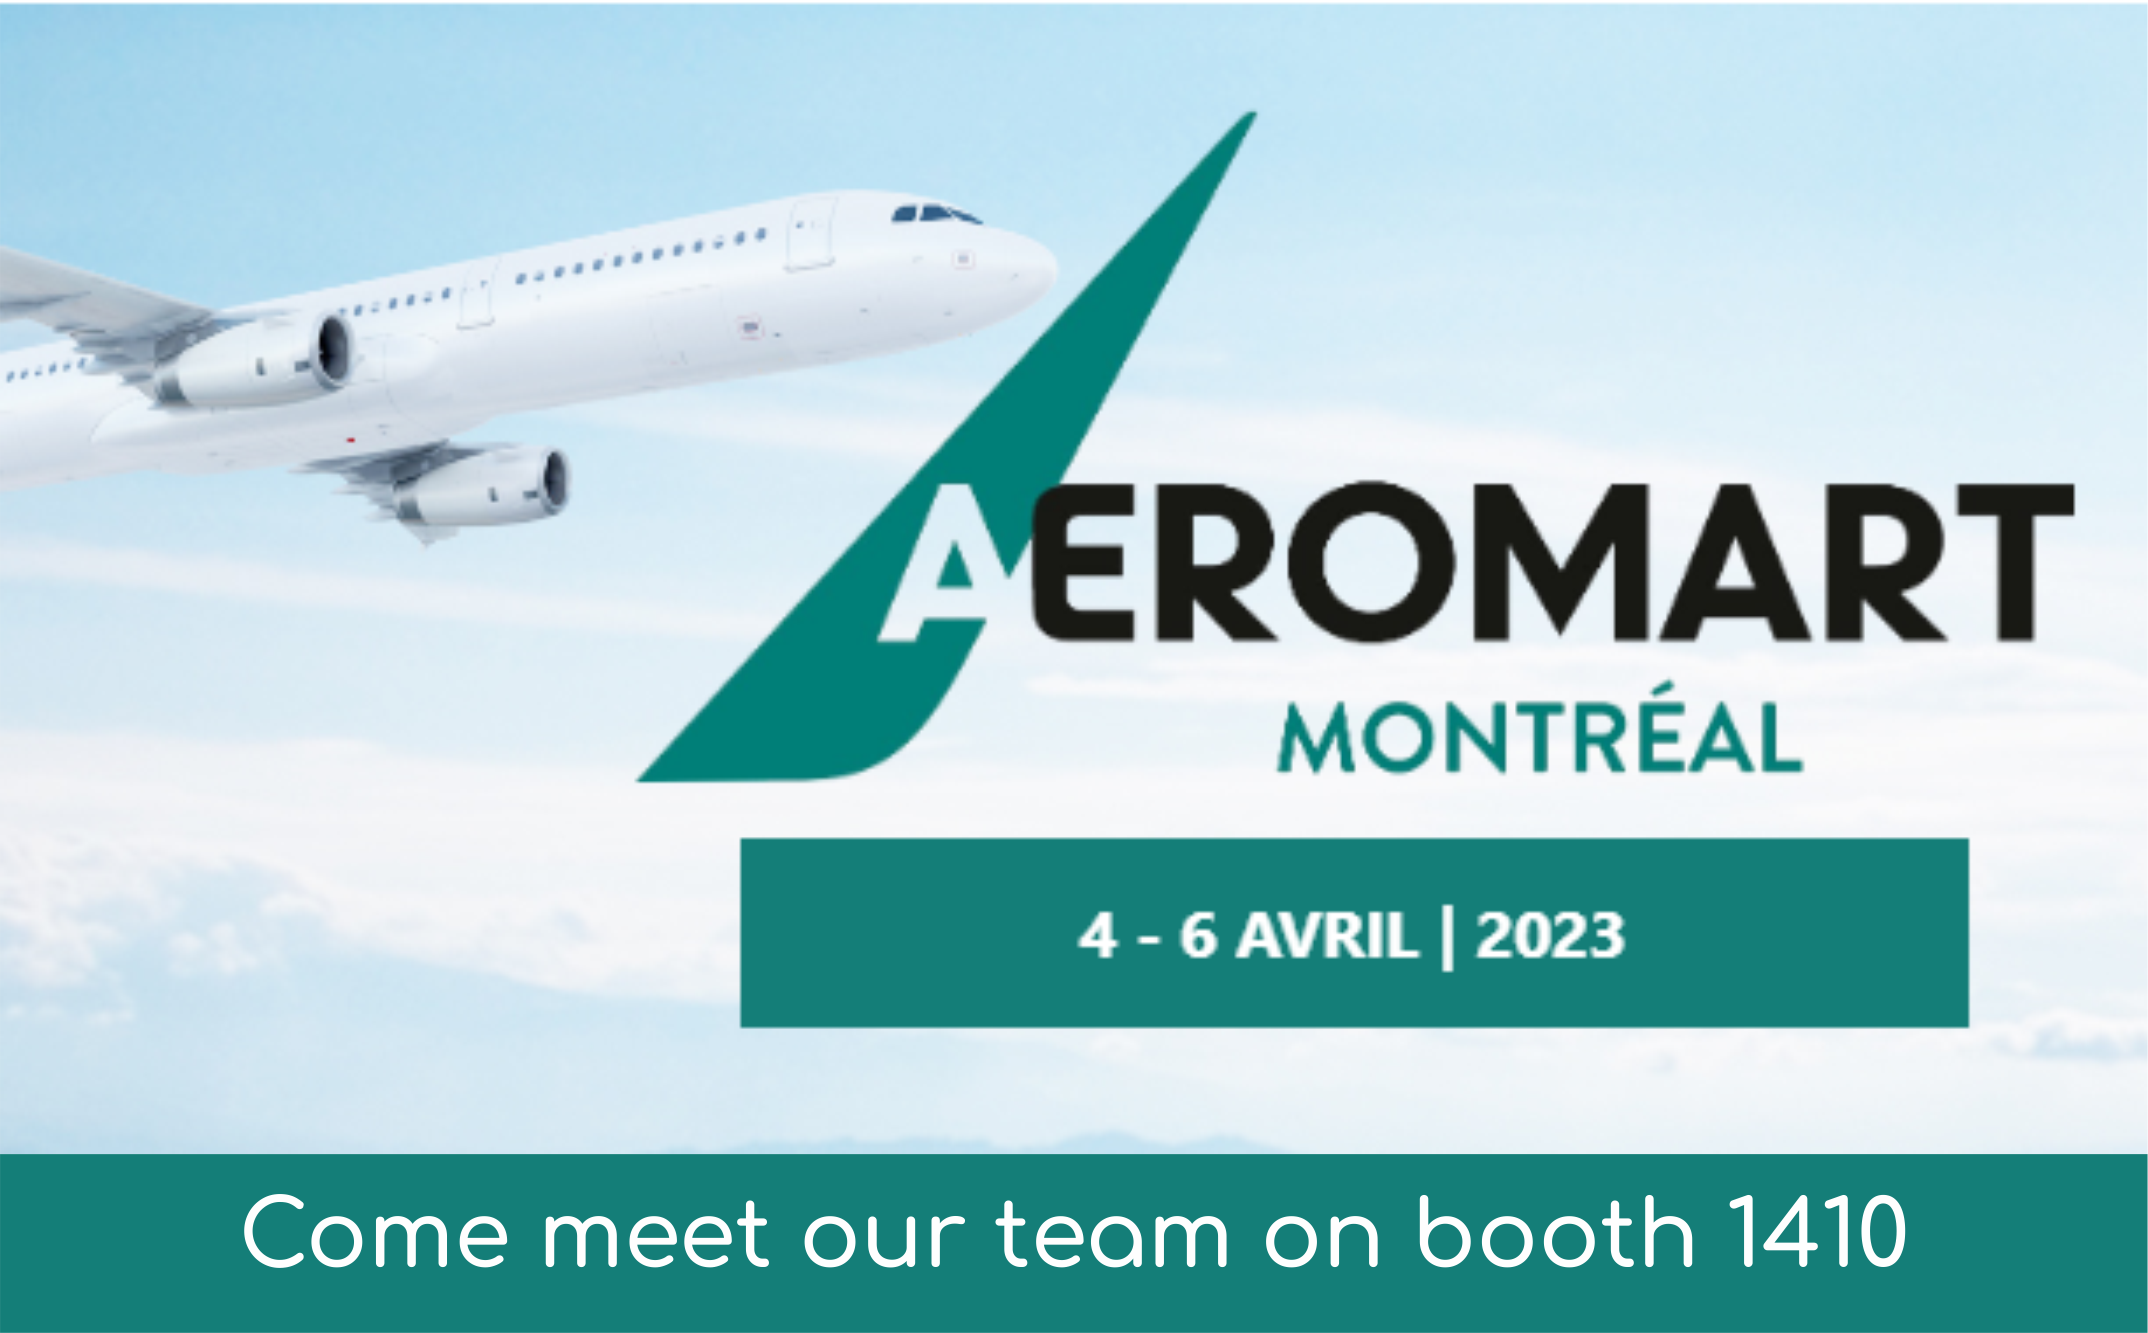 ARESIA participates in the AEROMART Montreal business convention